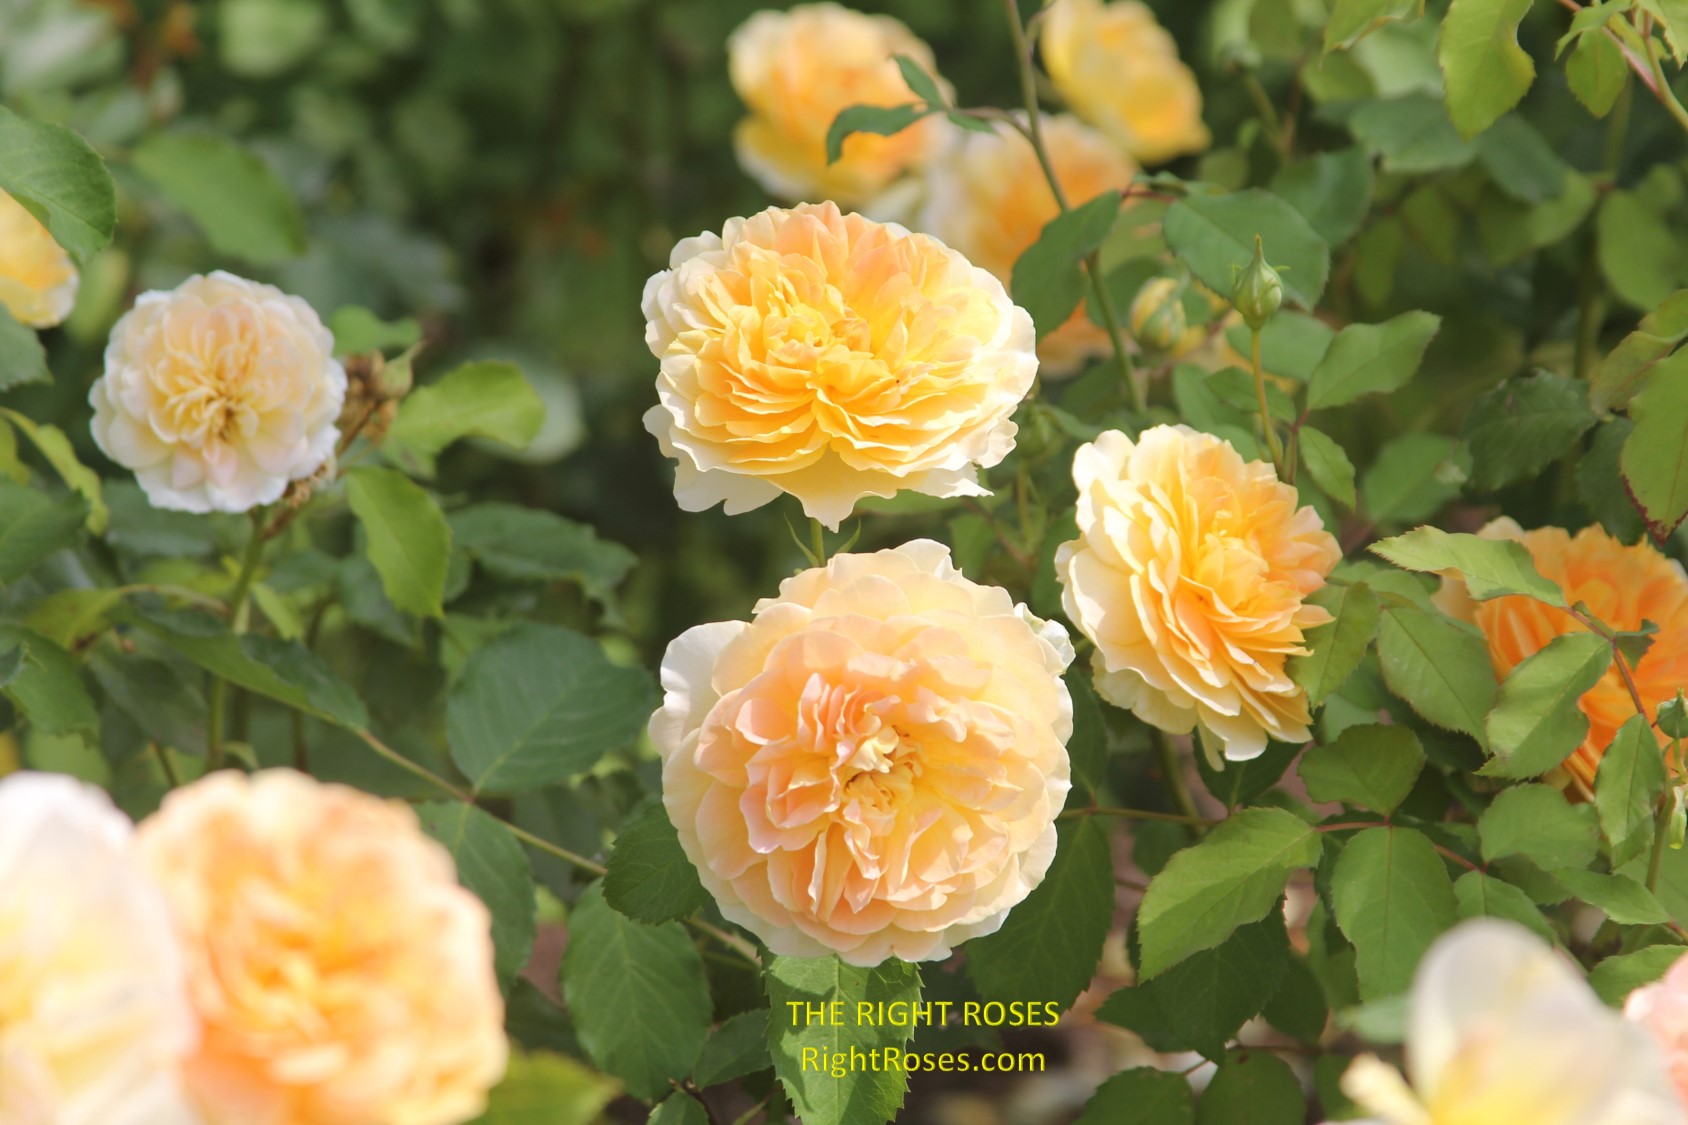 Molineux rose review the right roses score best top garden store david austin english roses rose products rose rating the right leap rose food fertilizer